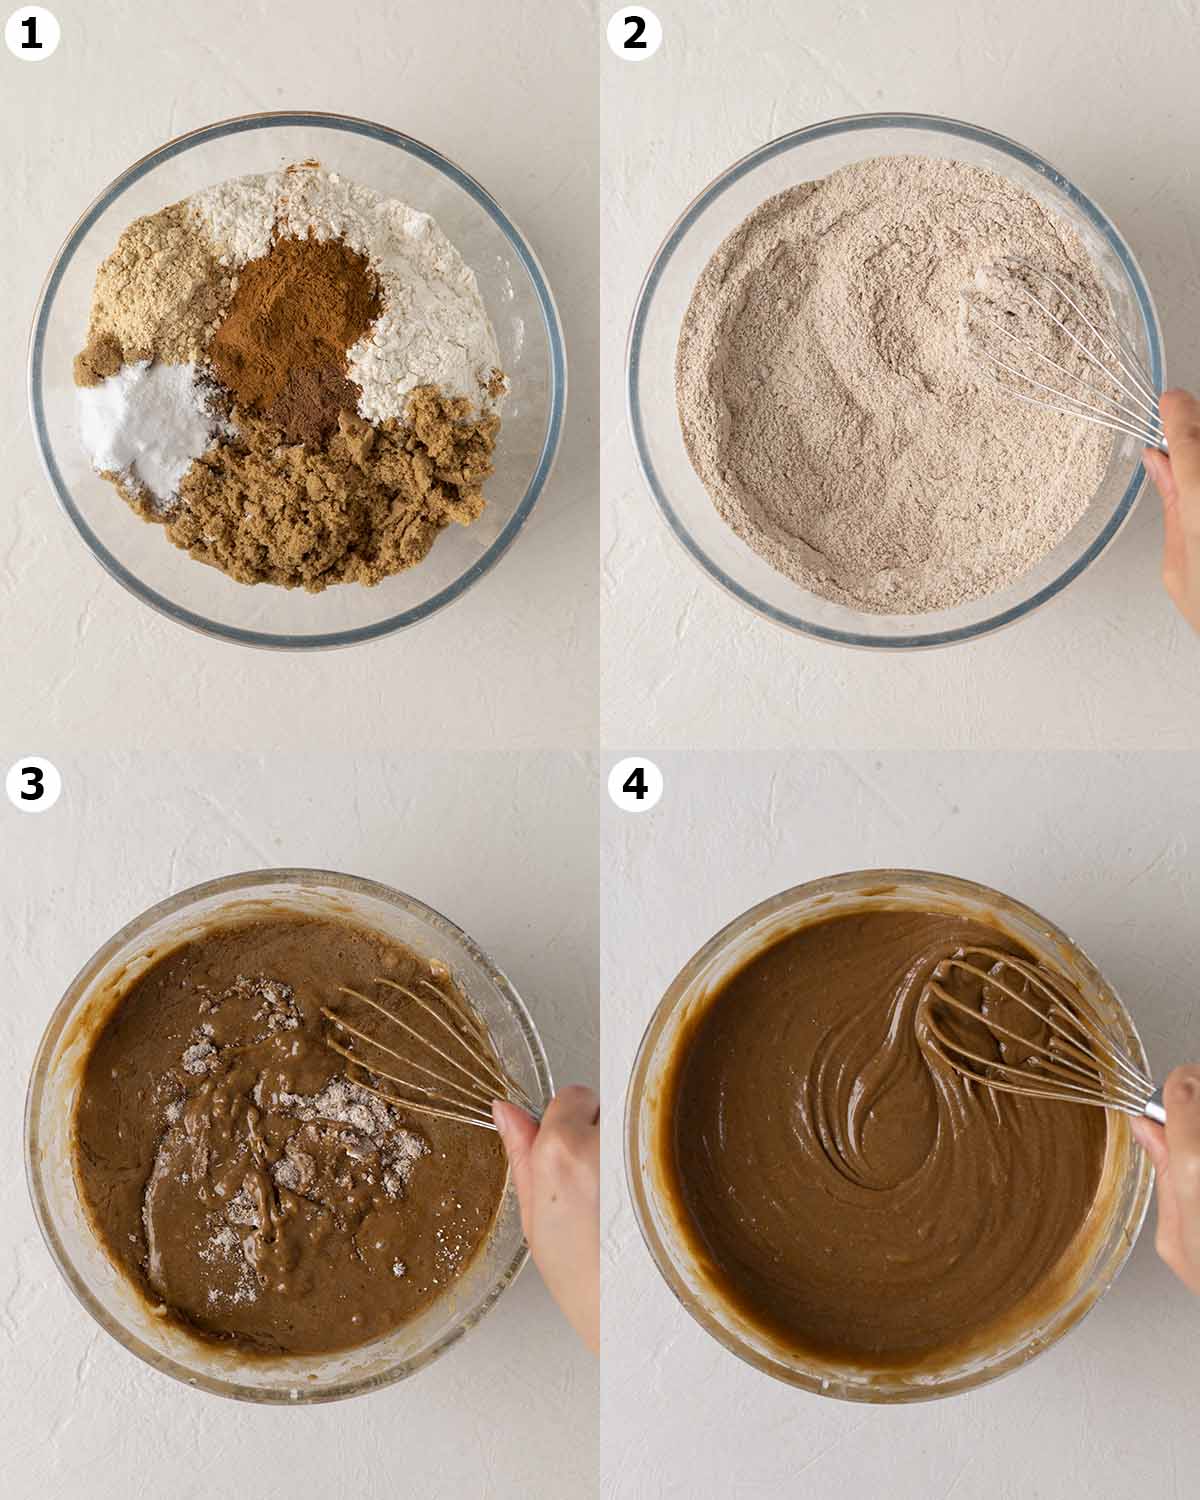 Four image collage showing how to make gingerbread cake batter in one bowl.